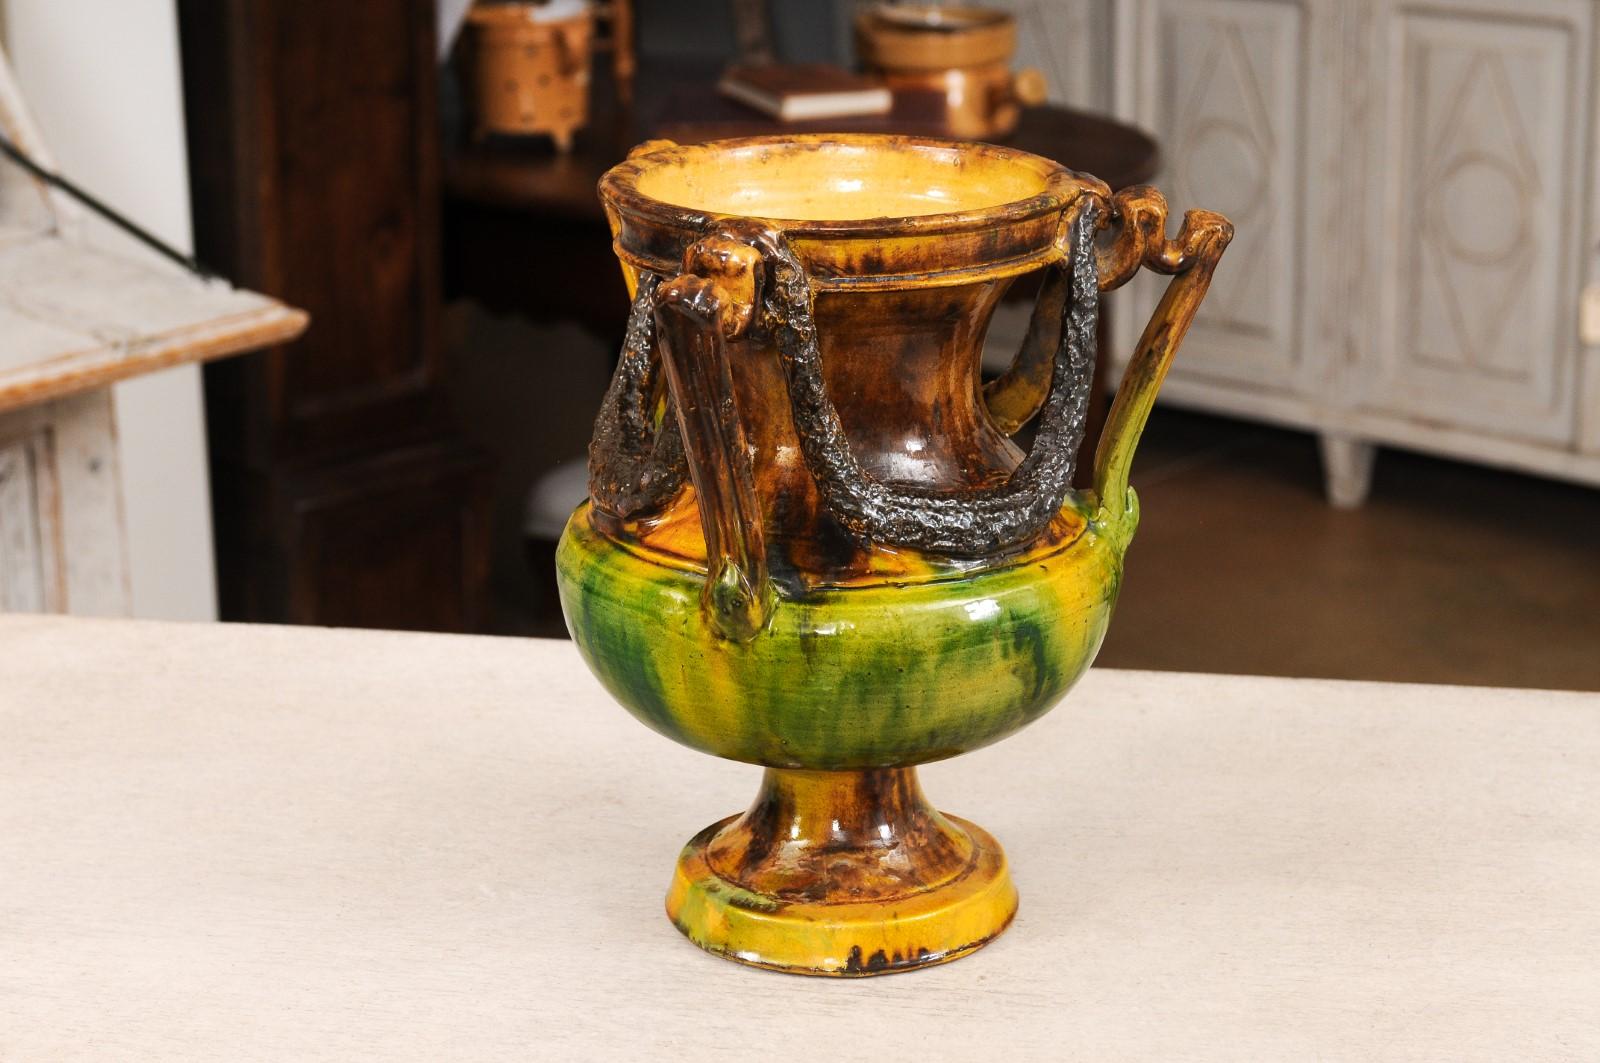 French Classical 19th Century Anduze Multi-Colored Glazed Vase with Swag Motifs In Good Condition For Sale In Atlanta, GA